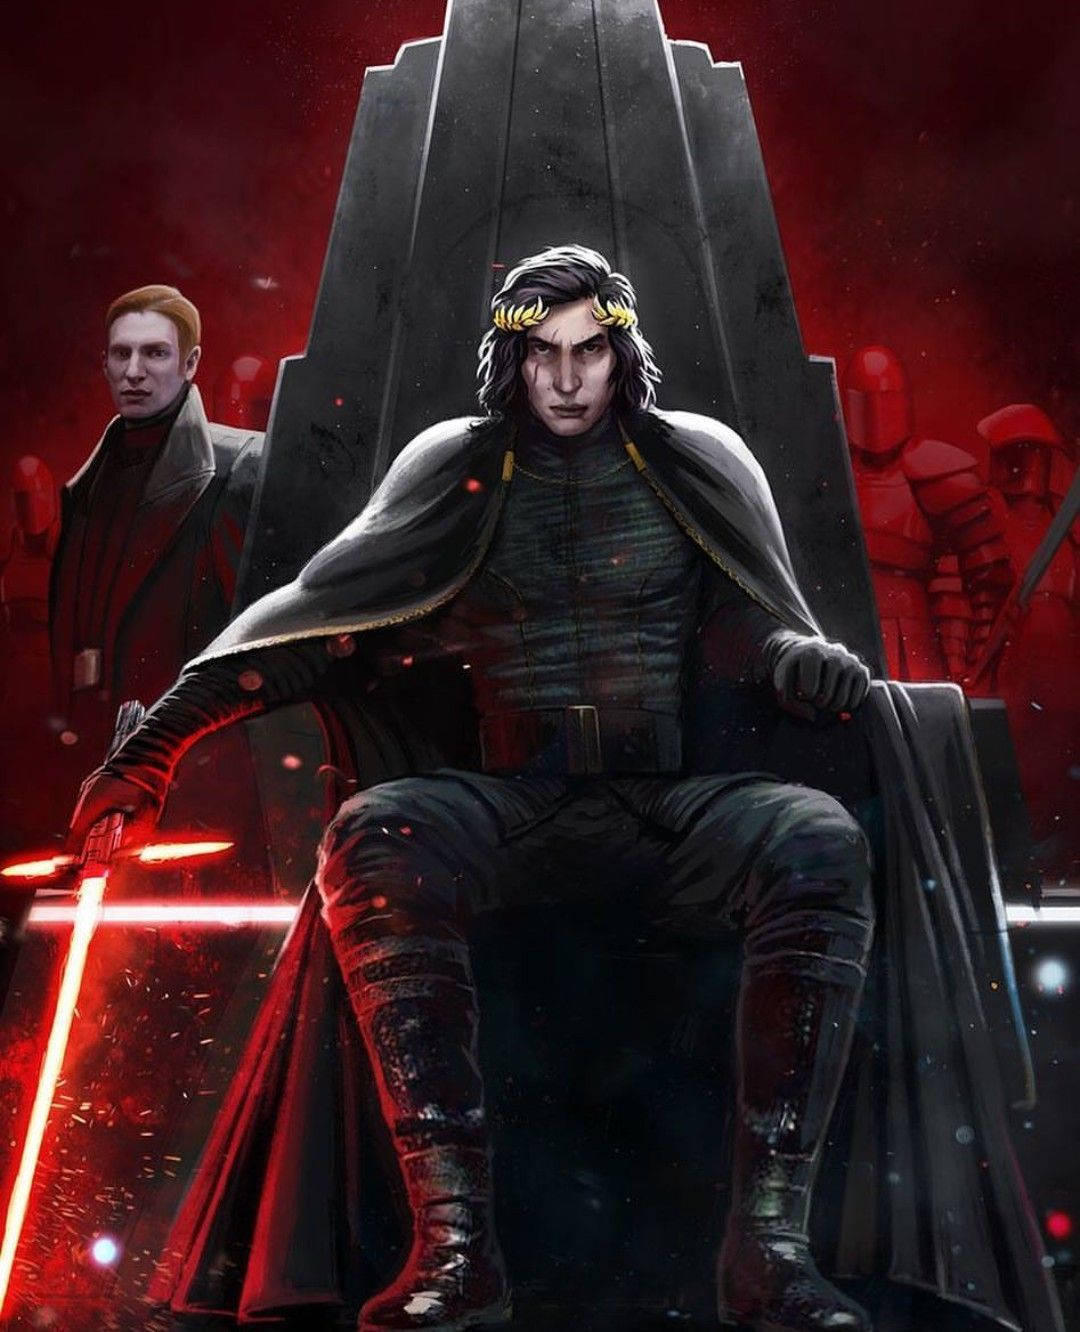 Kylo Ren stares off into space in the throne room Wallpaper